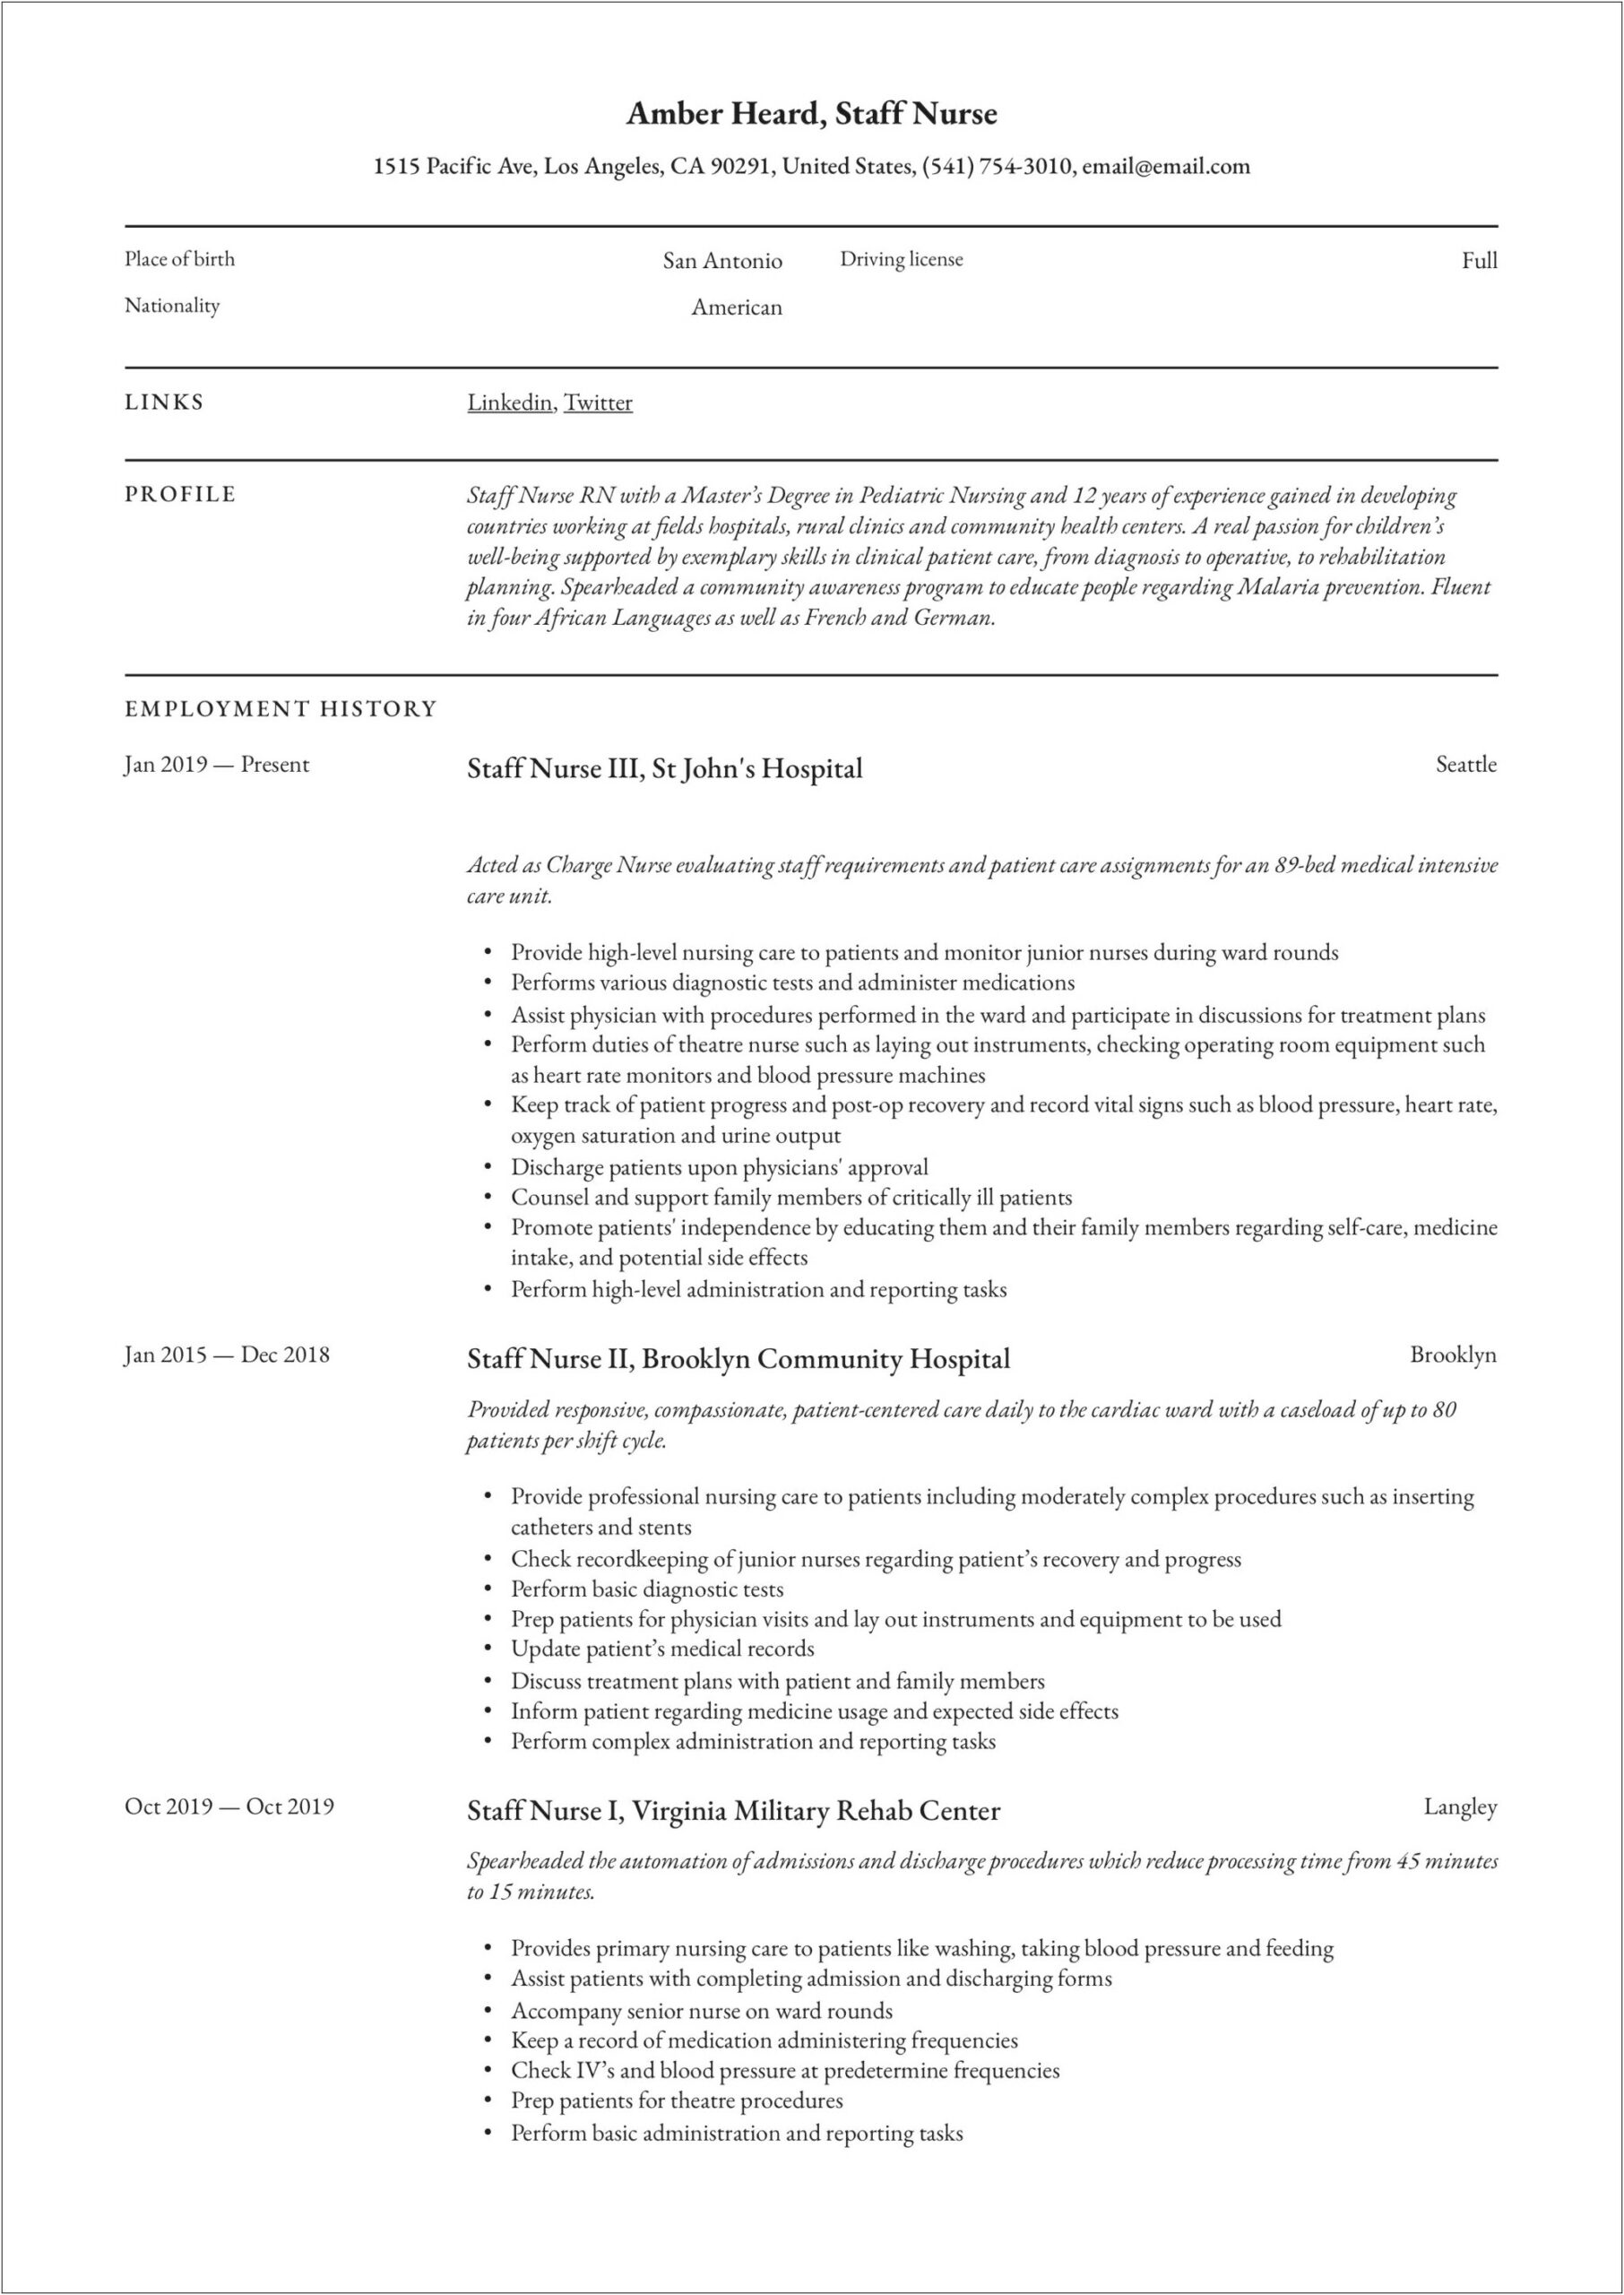 Resume Examples For Same Day Surgery Nurse